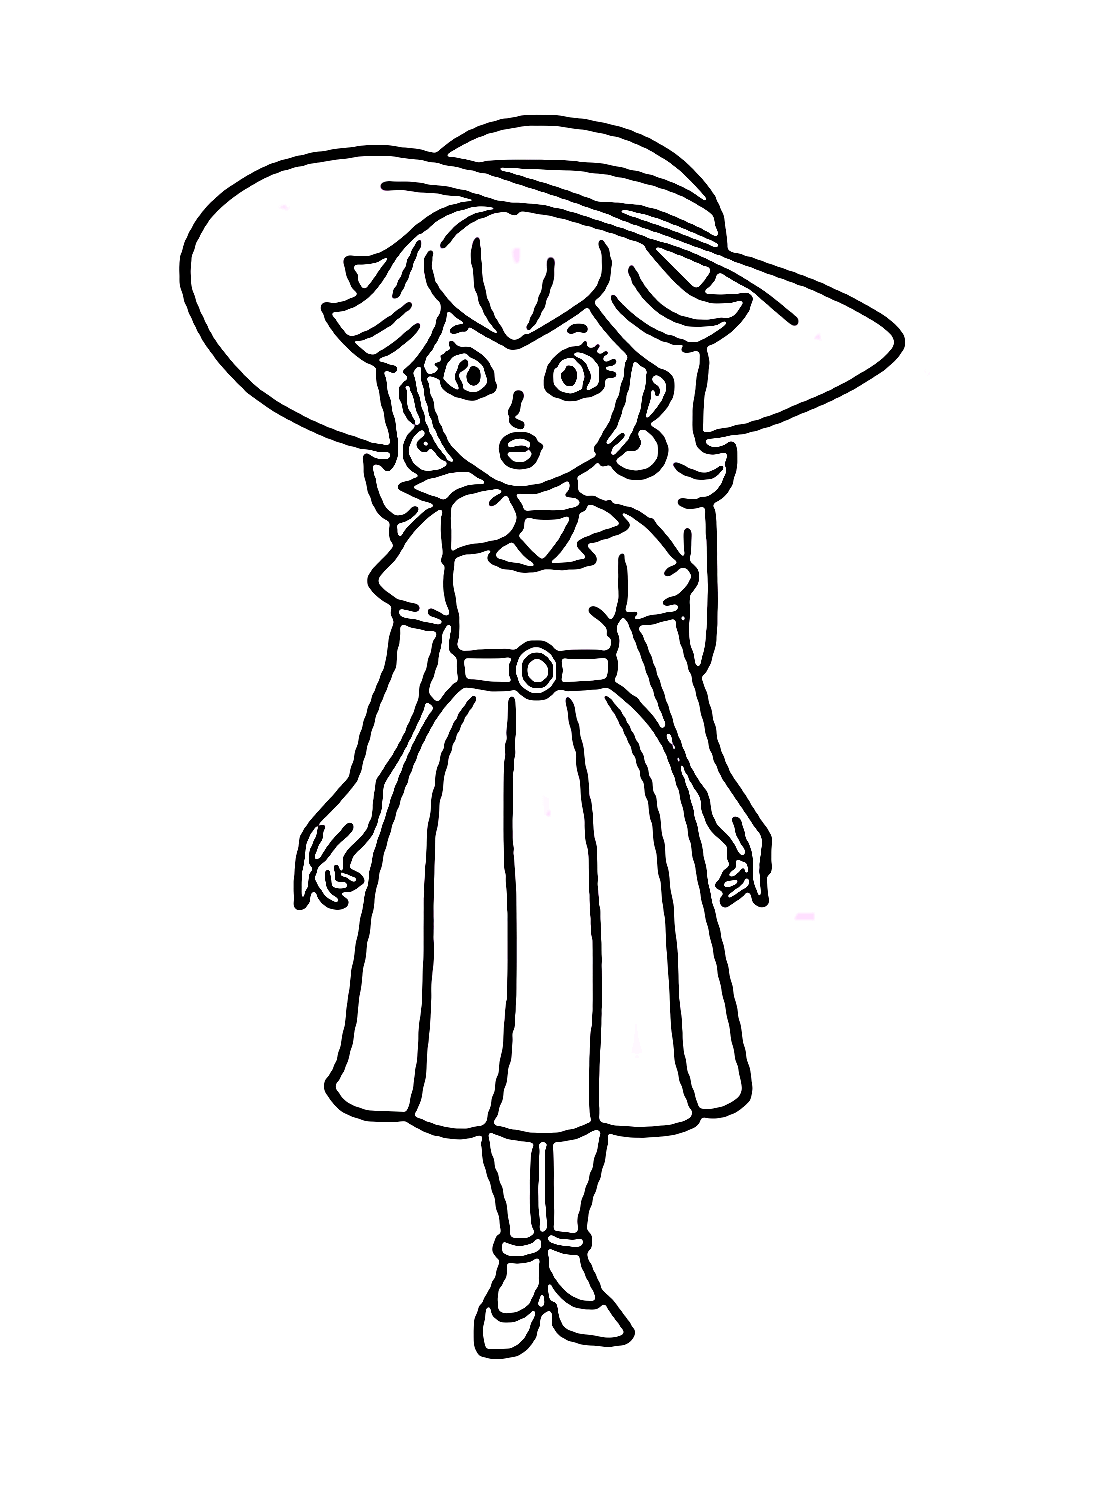 Princess Peach in Summer Dress Coloring Page